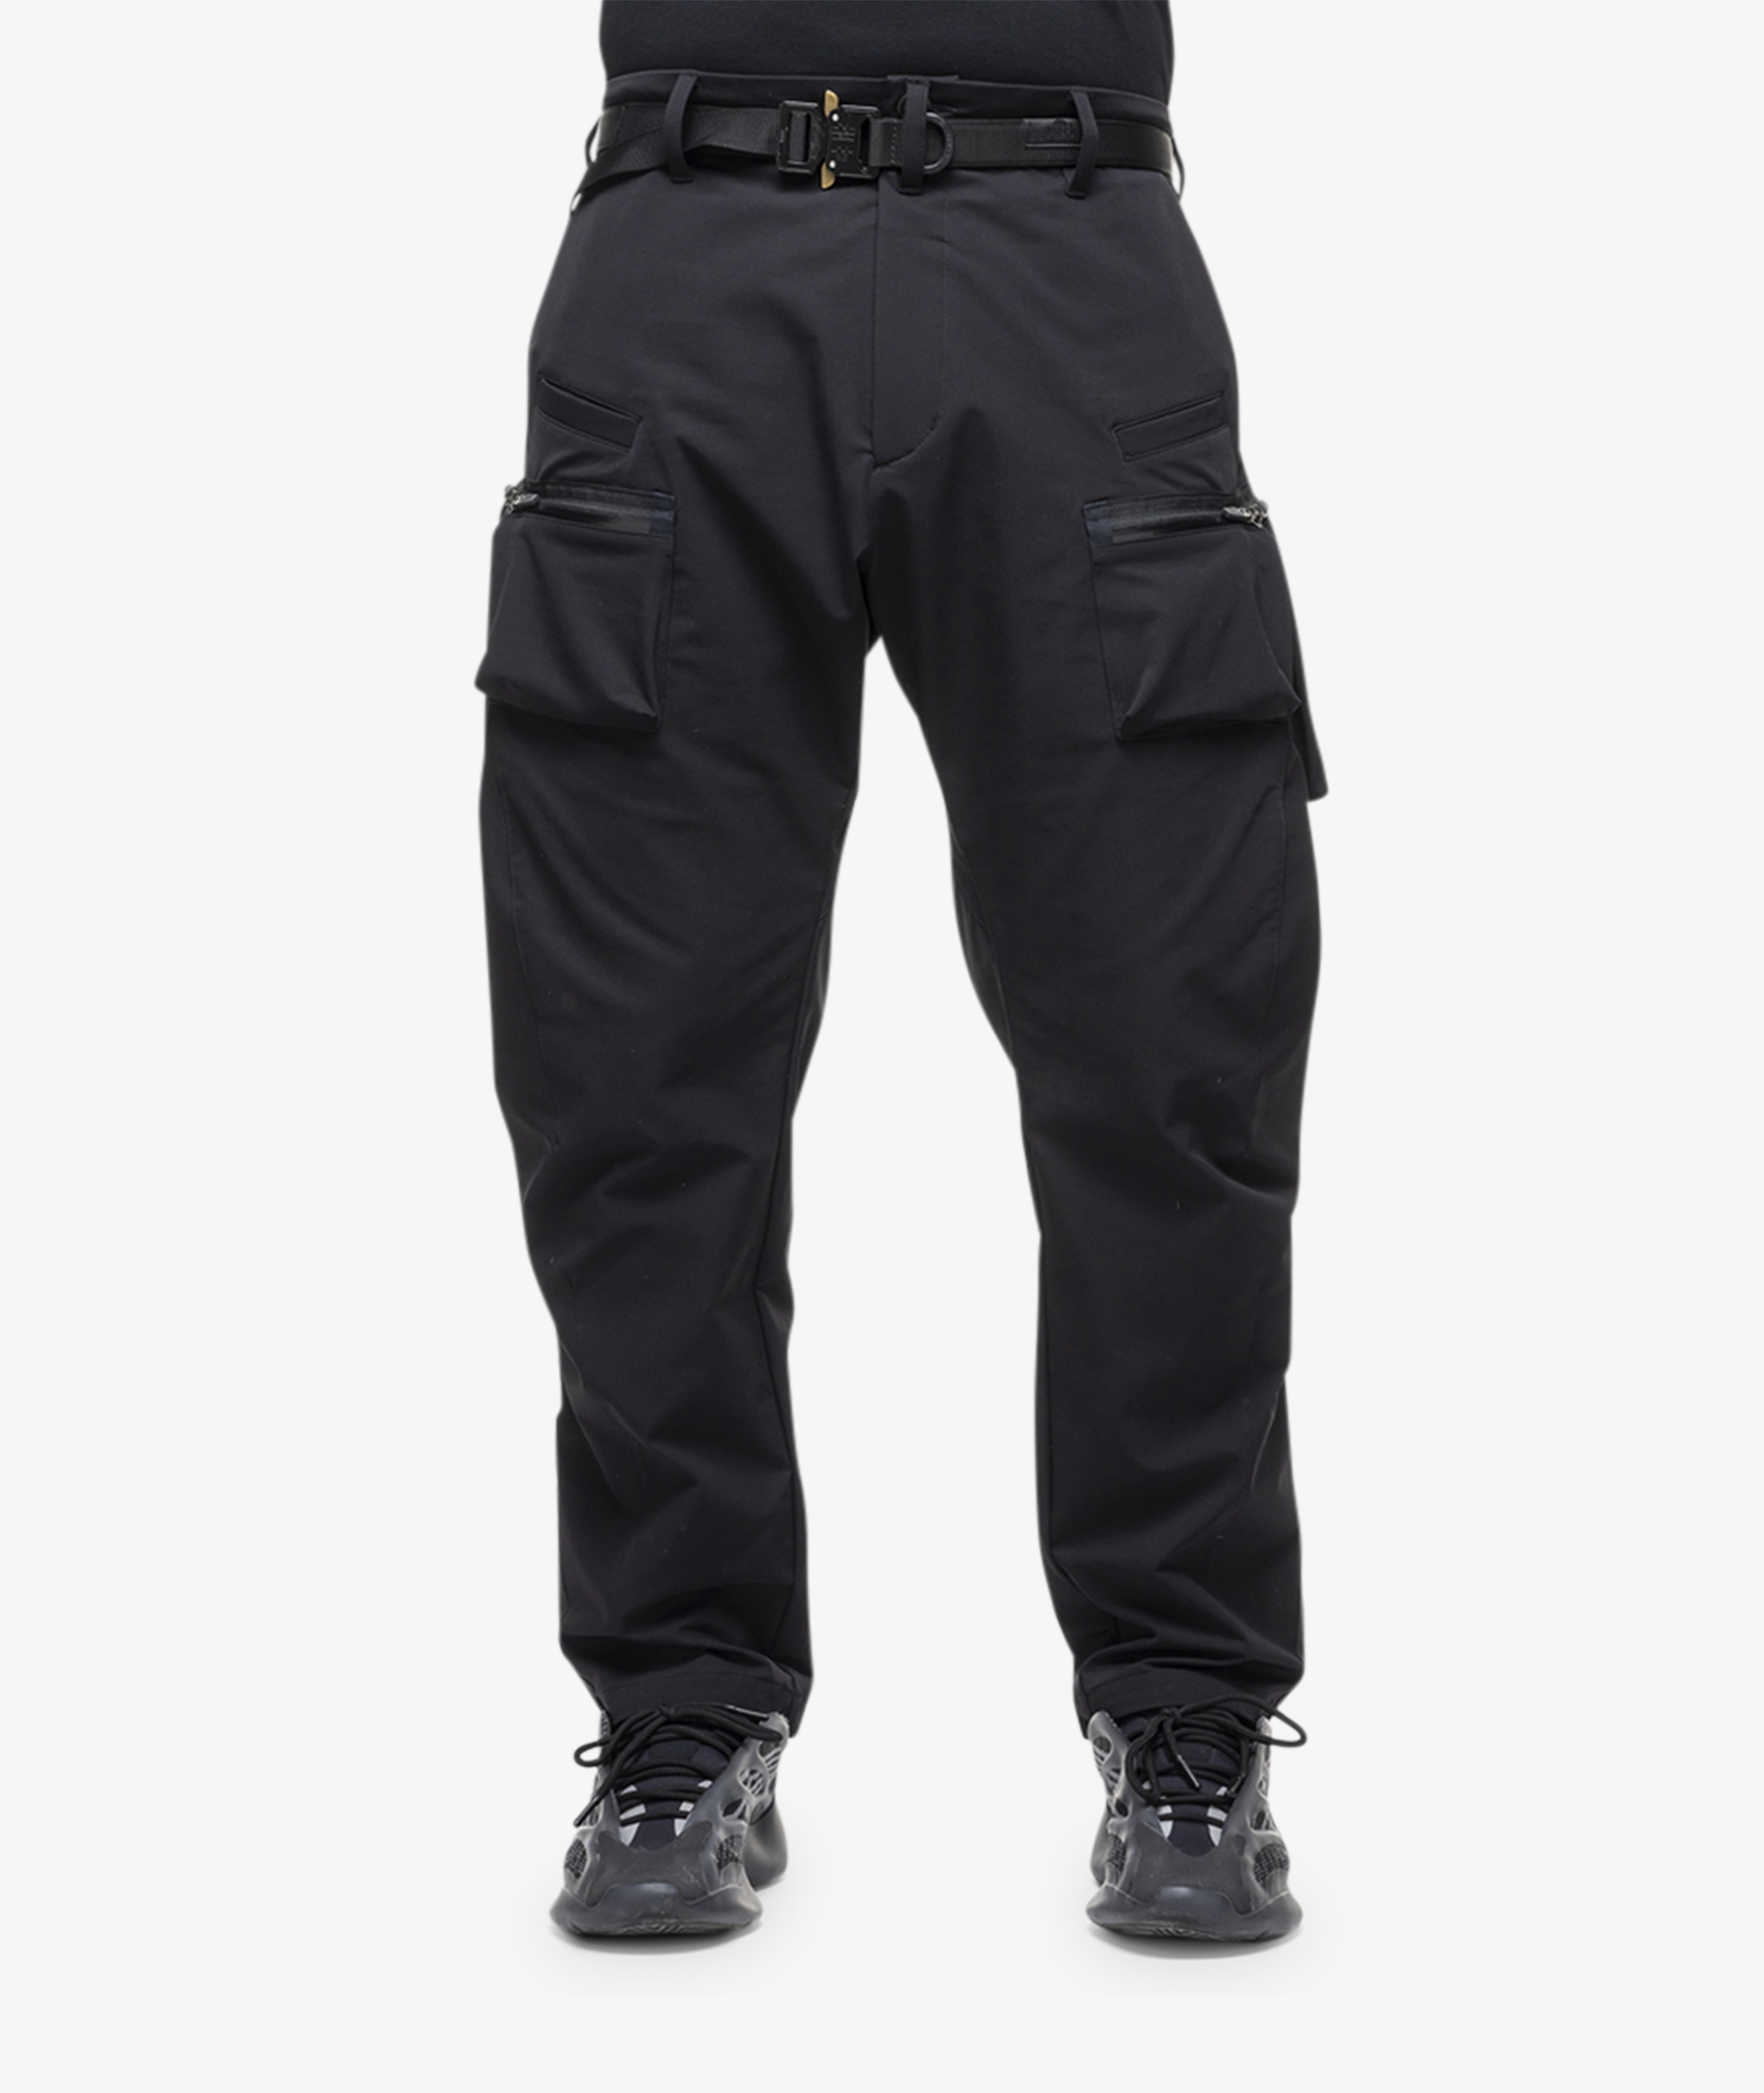 Norse Store | Shipping Worldwide - Acronym P41-DS - Black